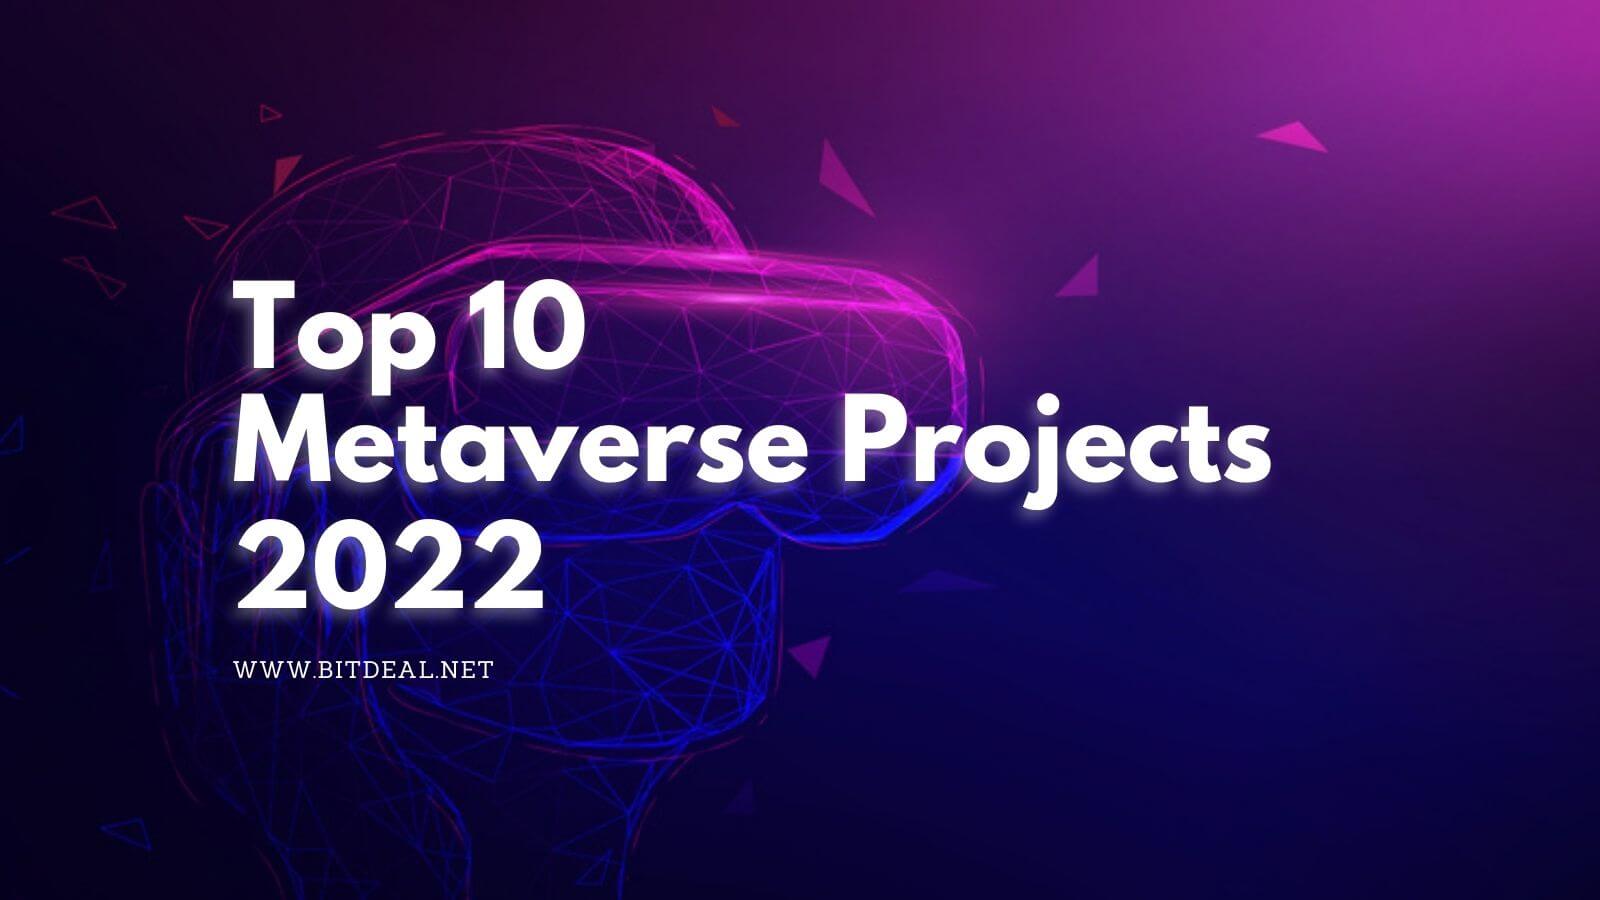 Top 10 Metaverse Projects to Watch Out in 2022 and Beyond!